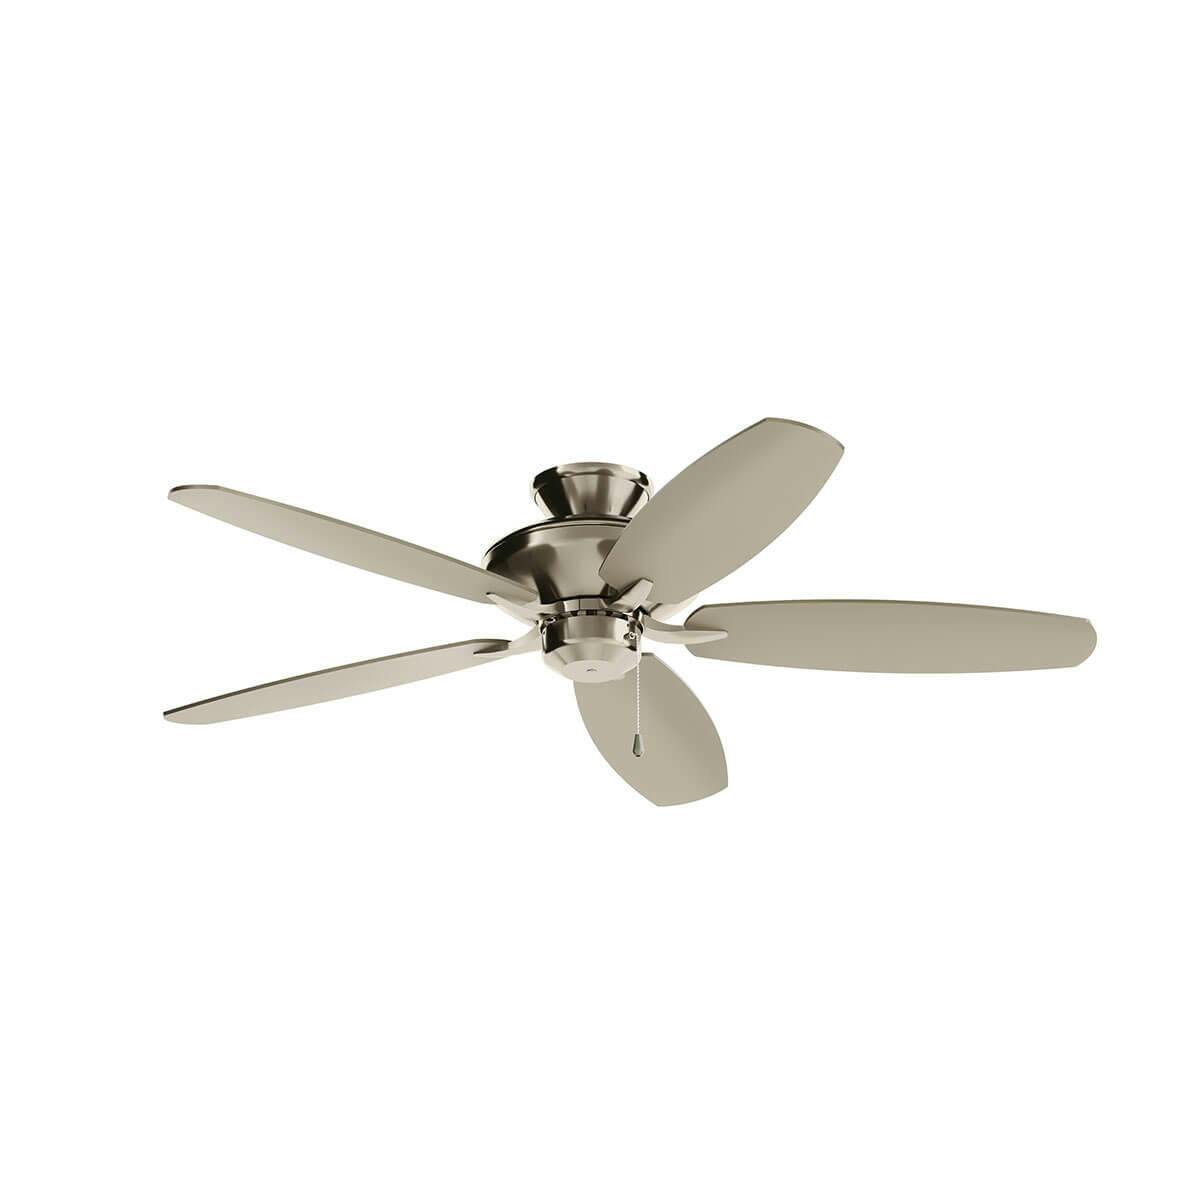 52" Renew Ceiling Fan Stainless Steel on a white background